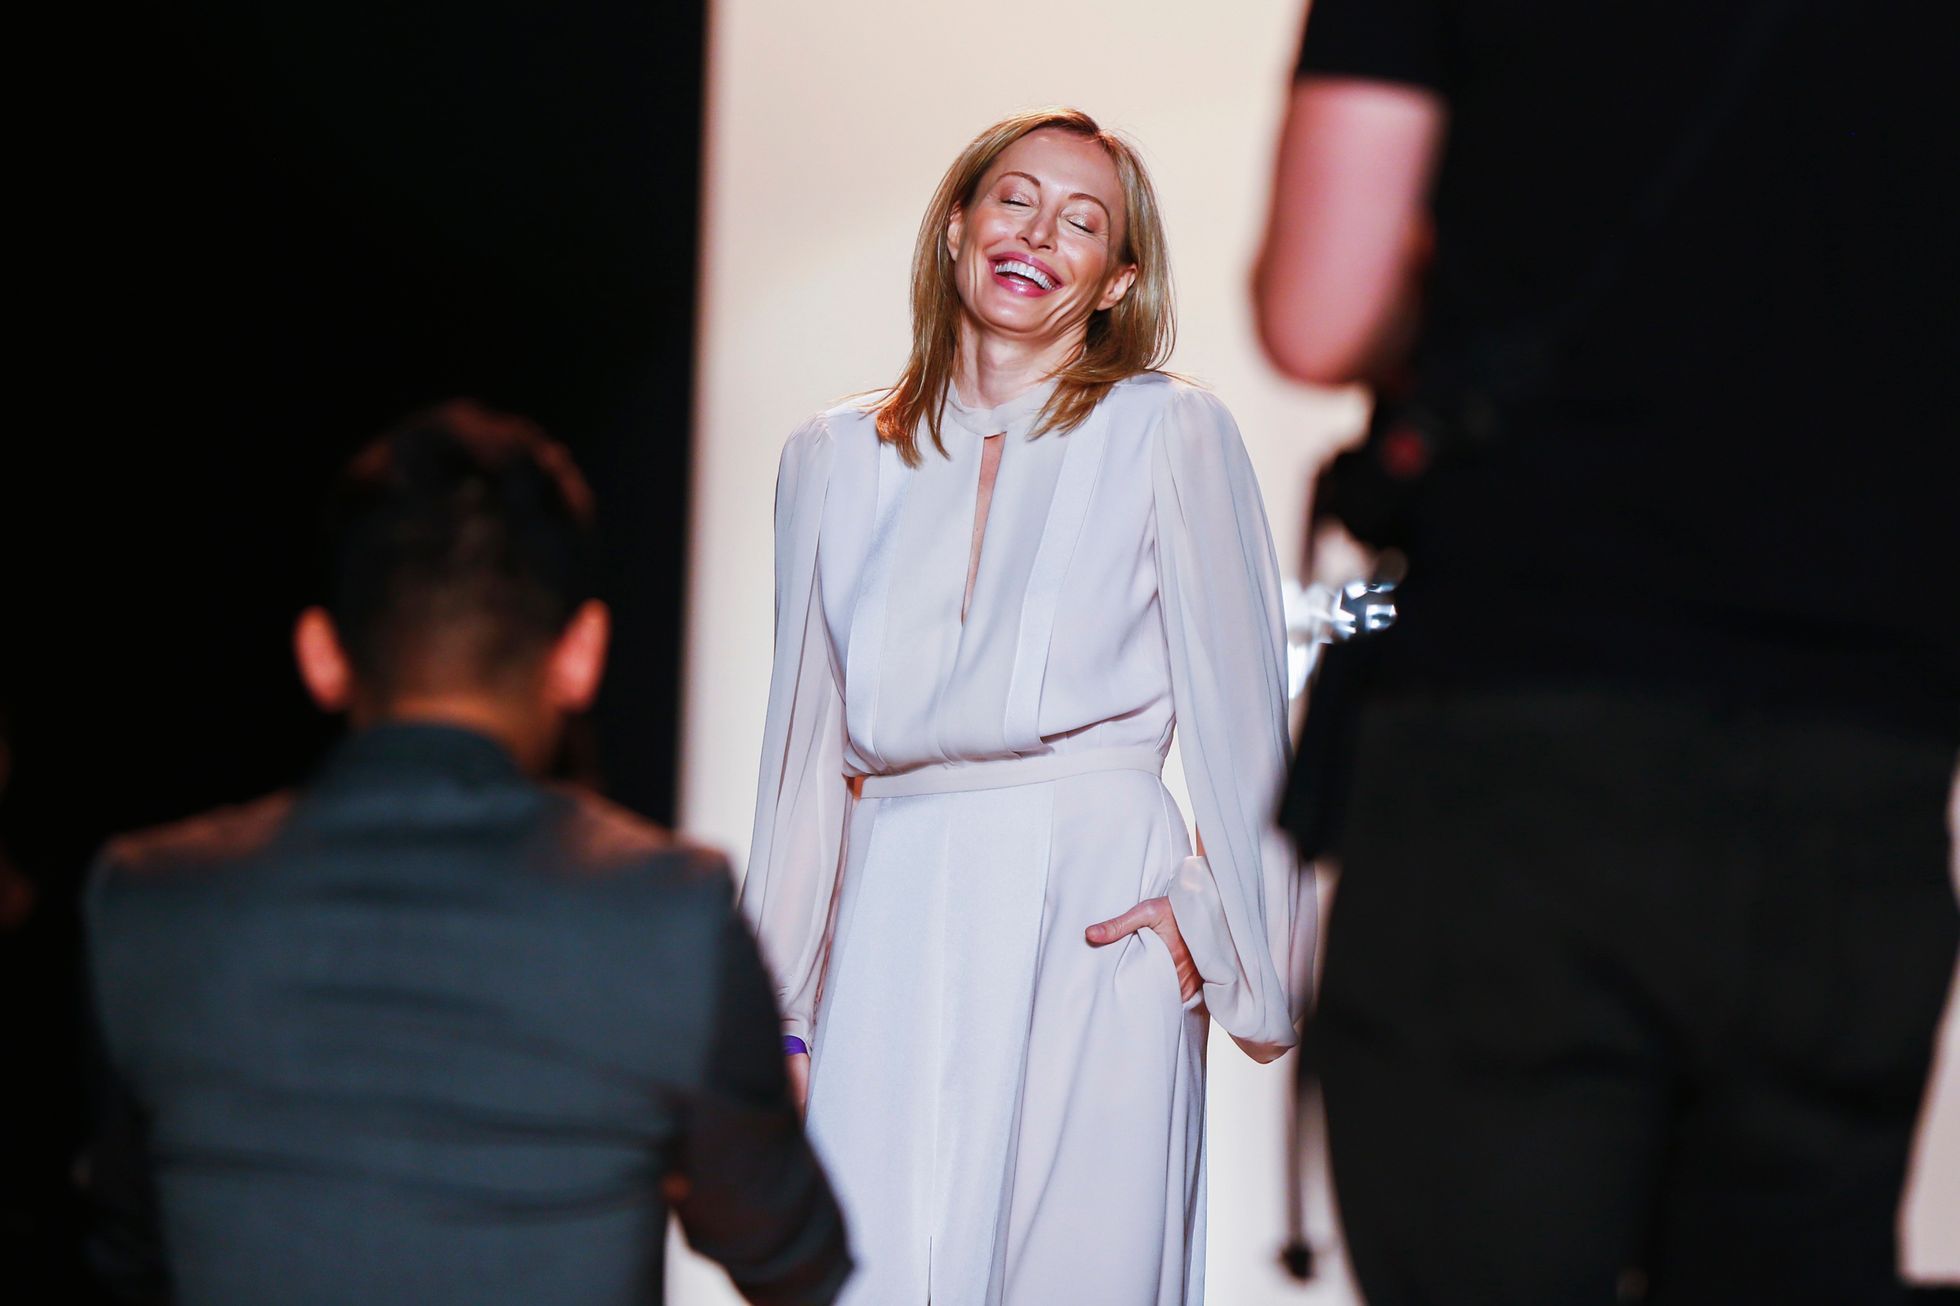 Designer Lubov Azria smiles for photographers before showing the BCBG Max Azria collection during New York Fashion Week